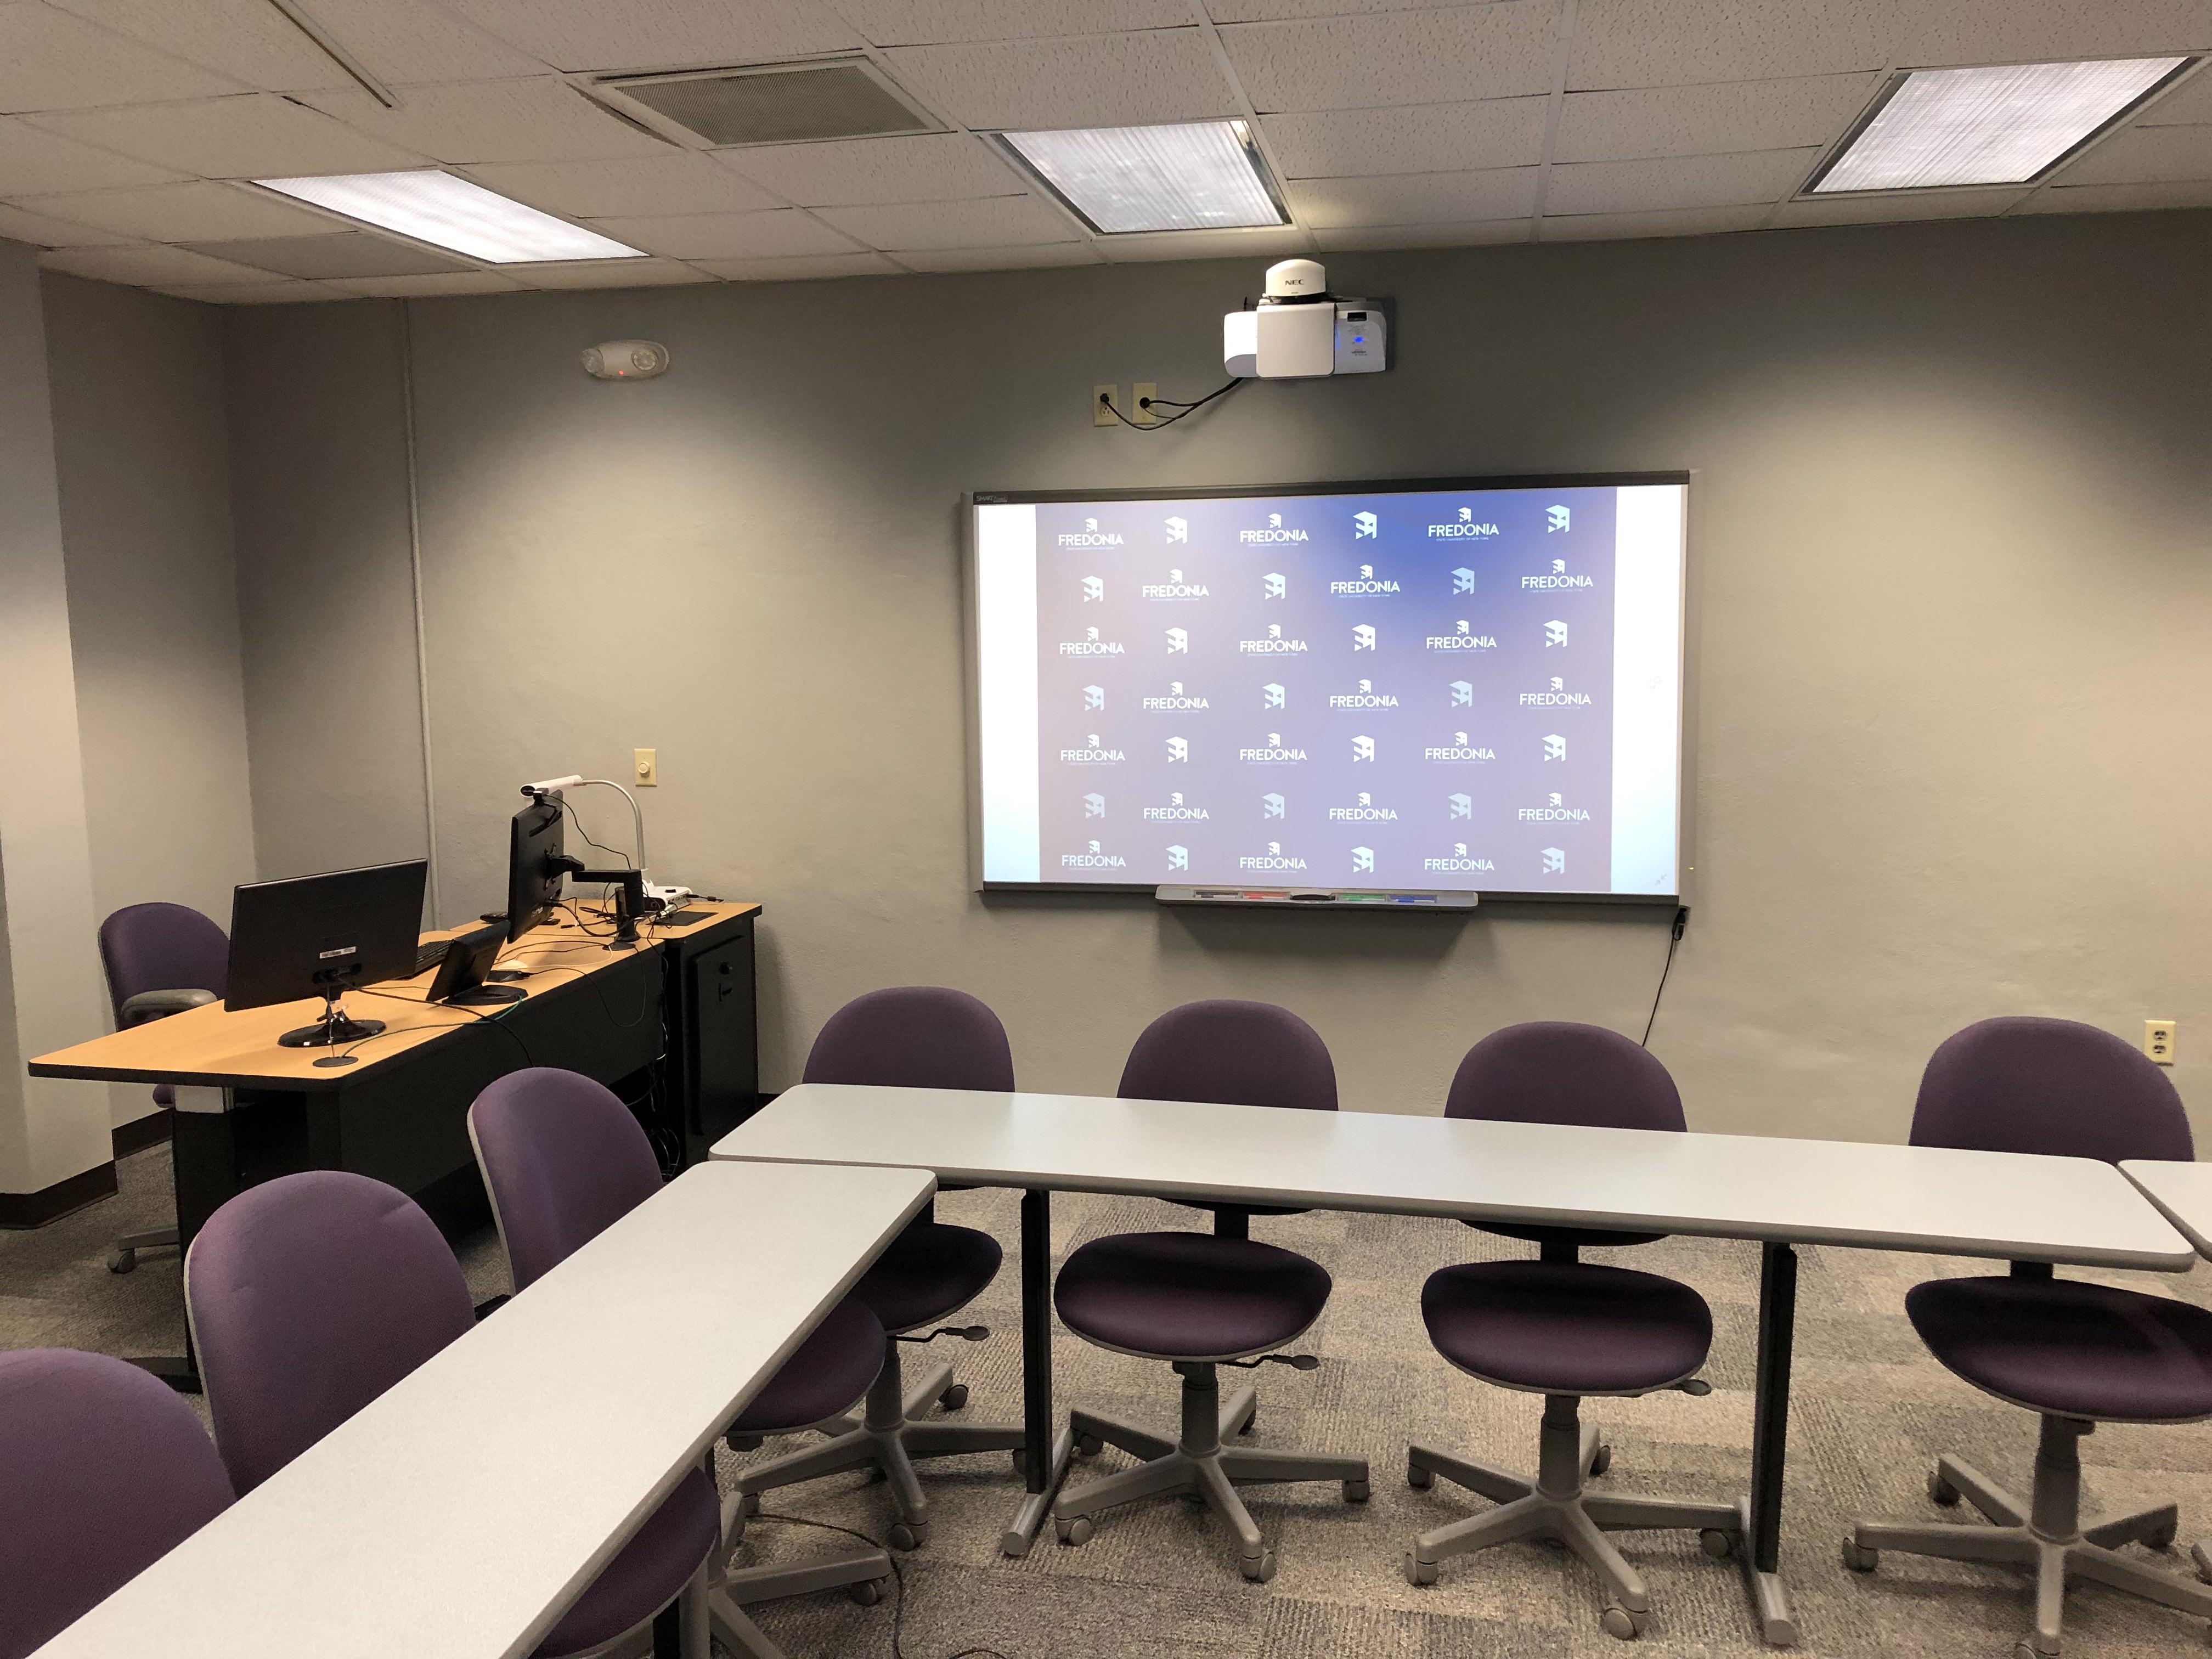 Projector Screen and Teachers Station